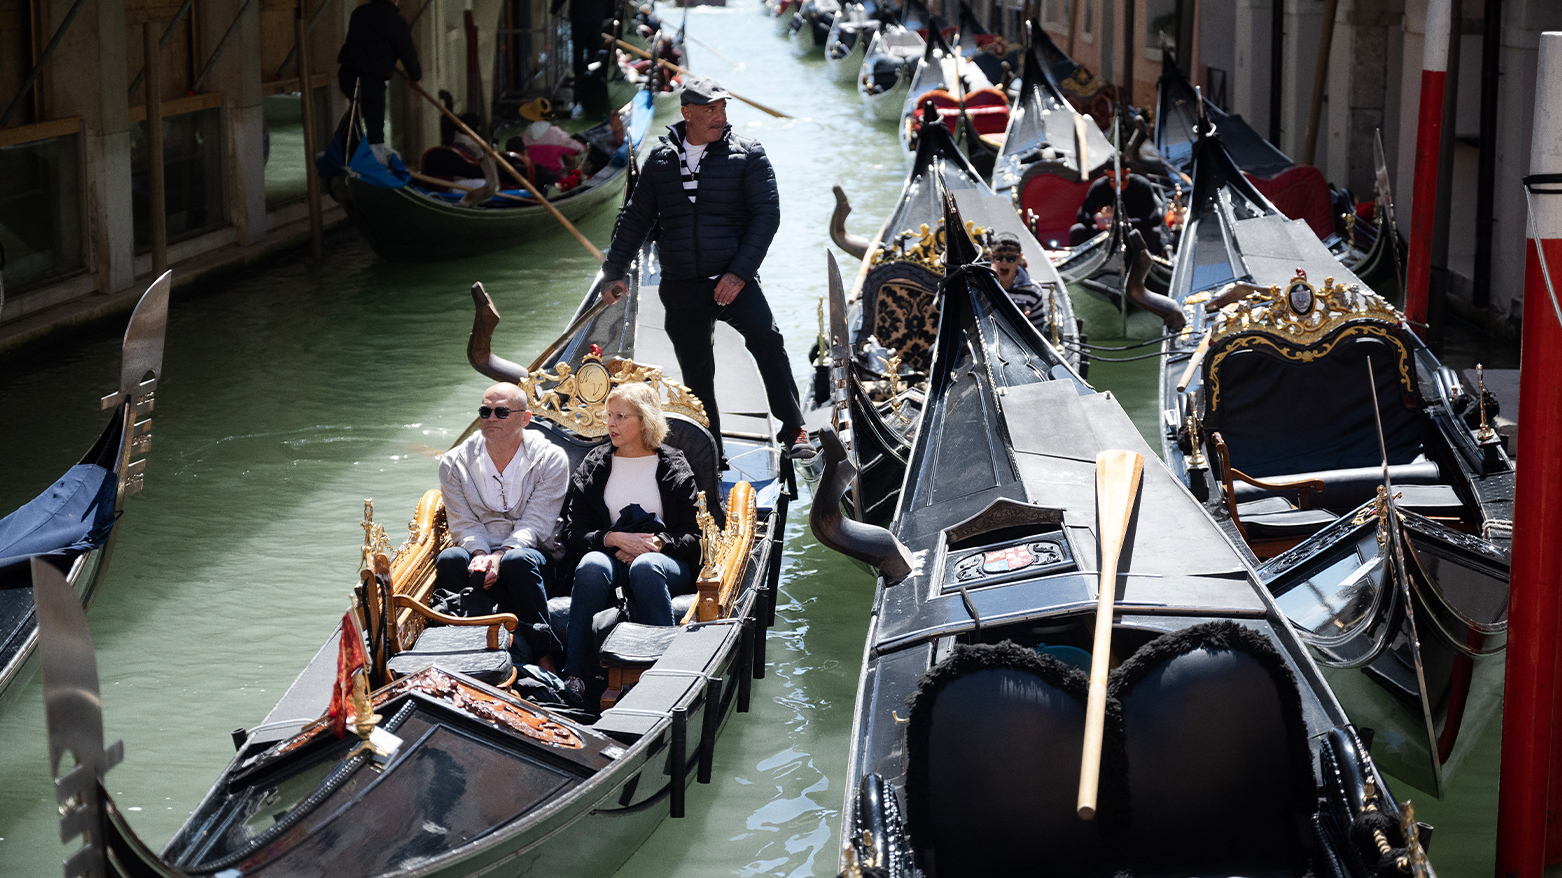 Tourism must change mayor says as Venice launches entry fee